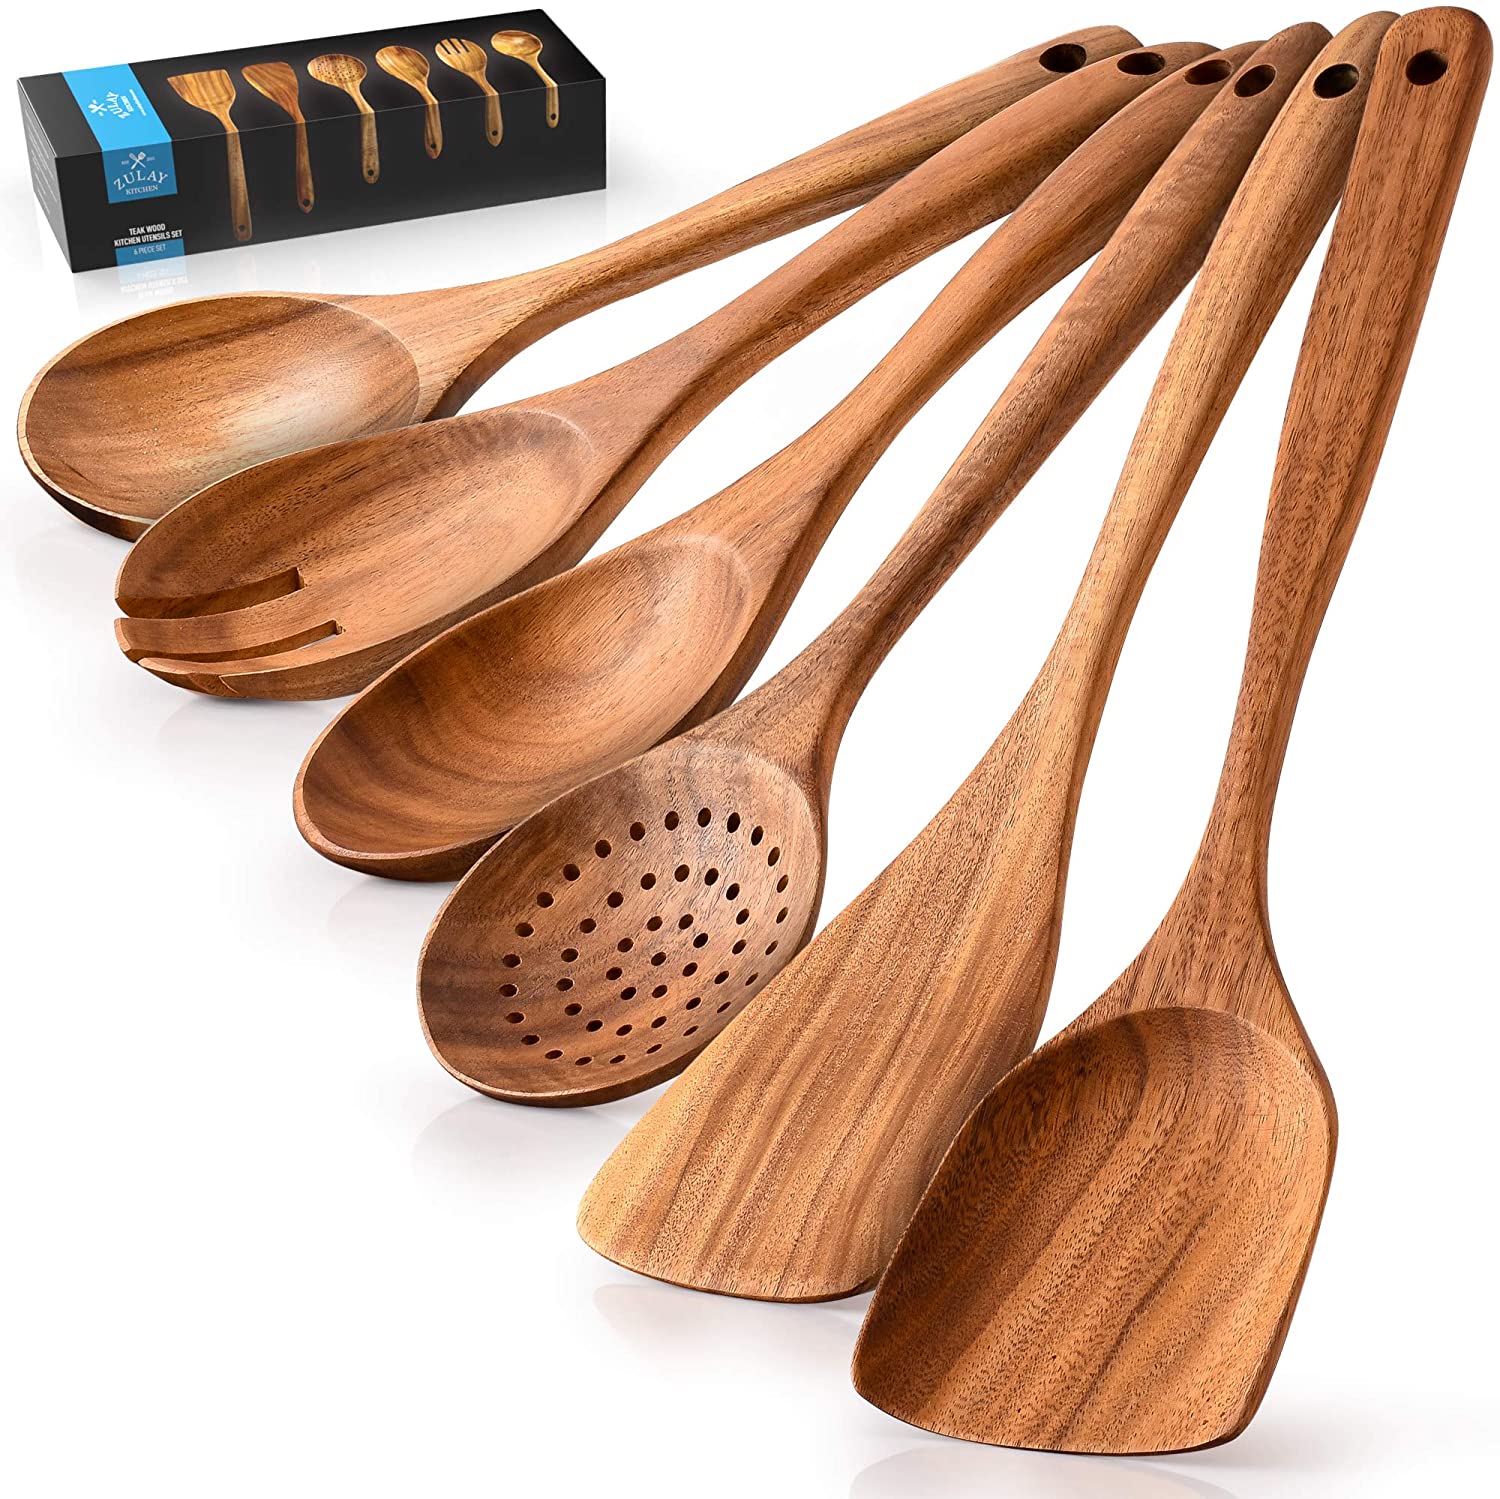 Teak Wooden Cooking Spoons (6 Pc Set) - Zulay KitchenZulay Kitchen